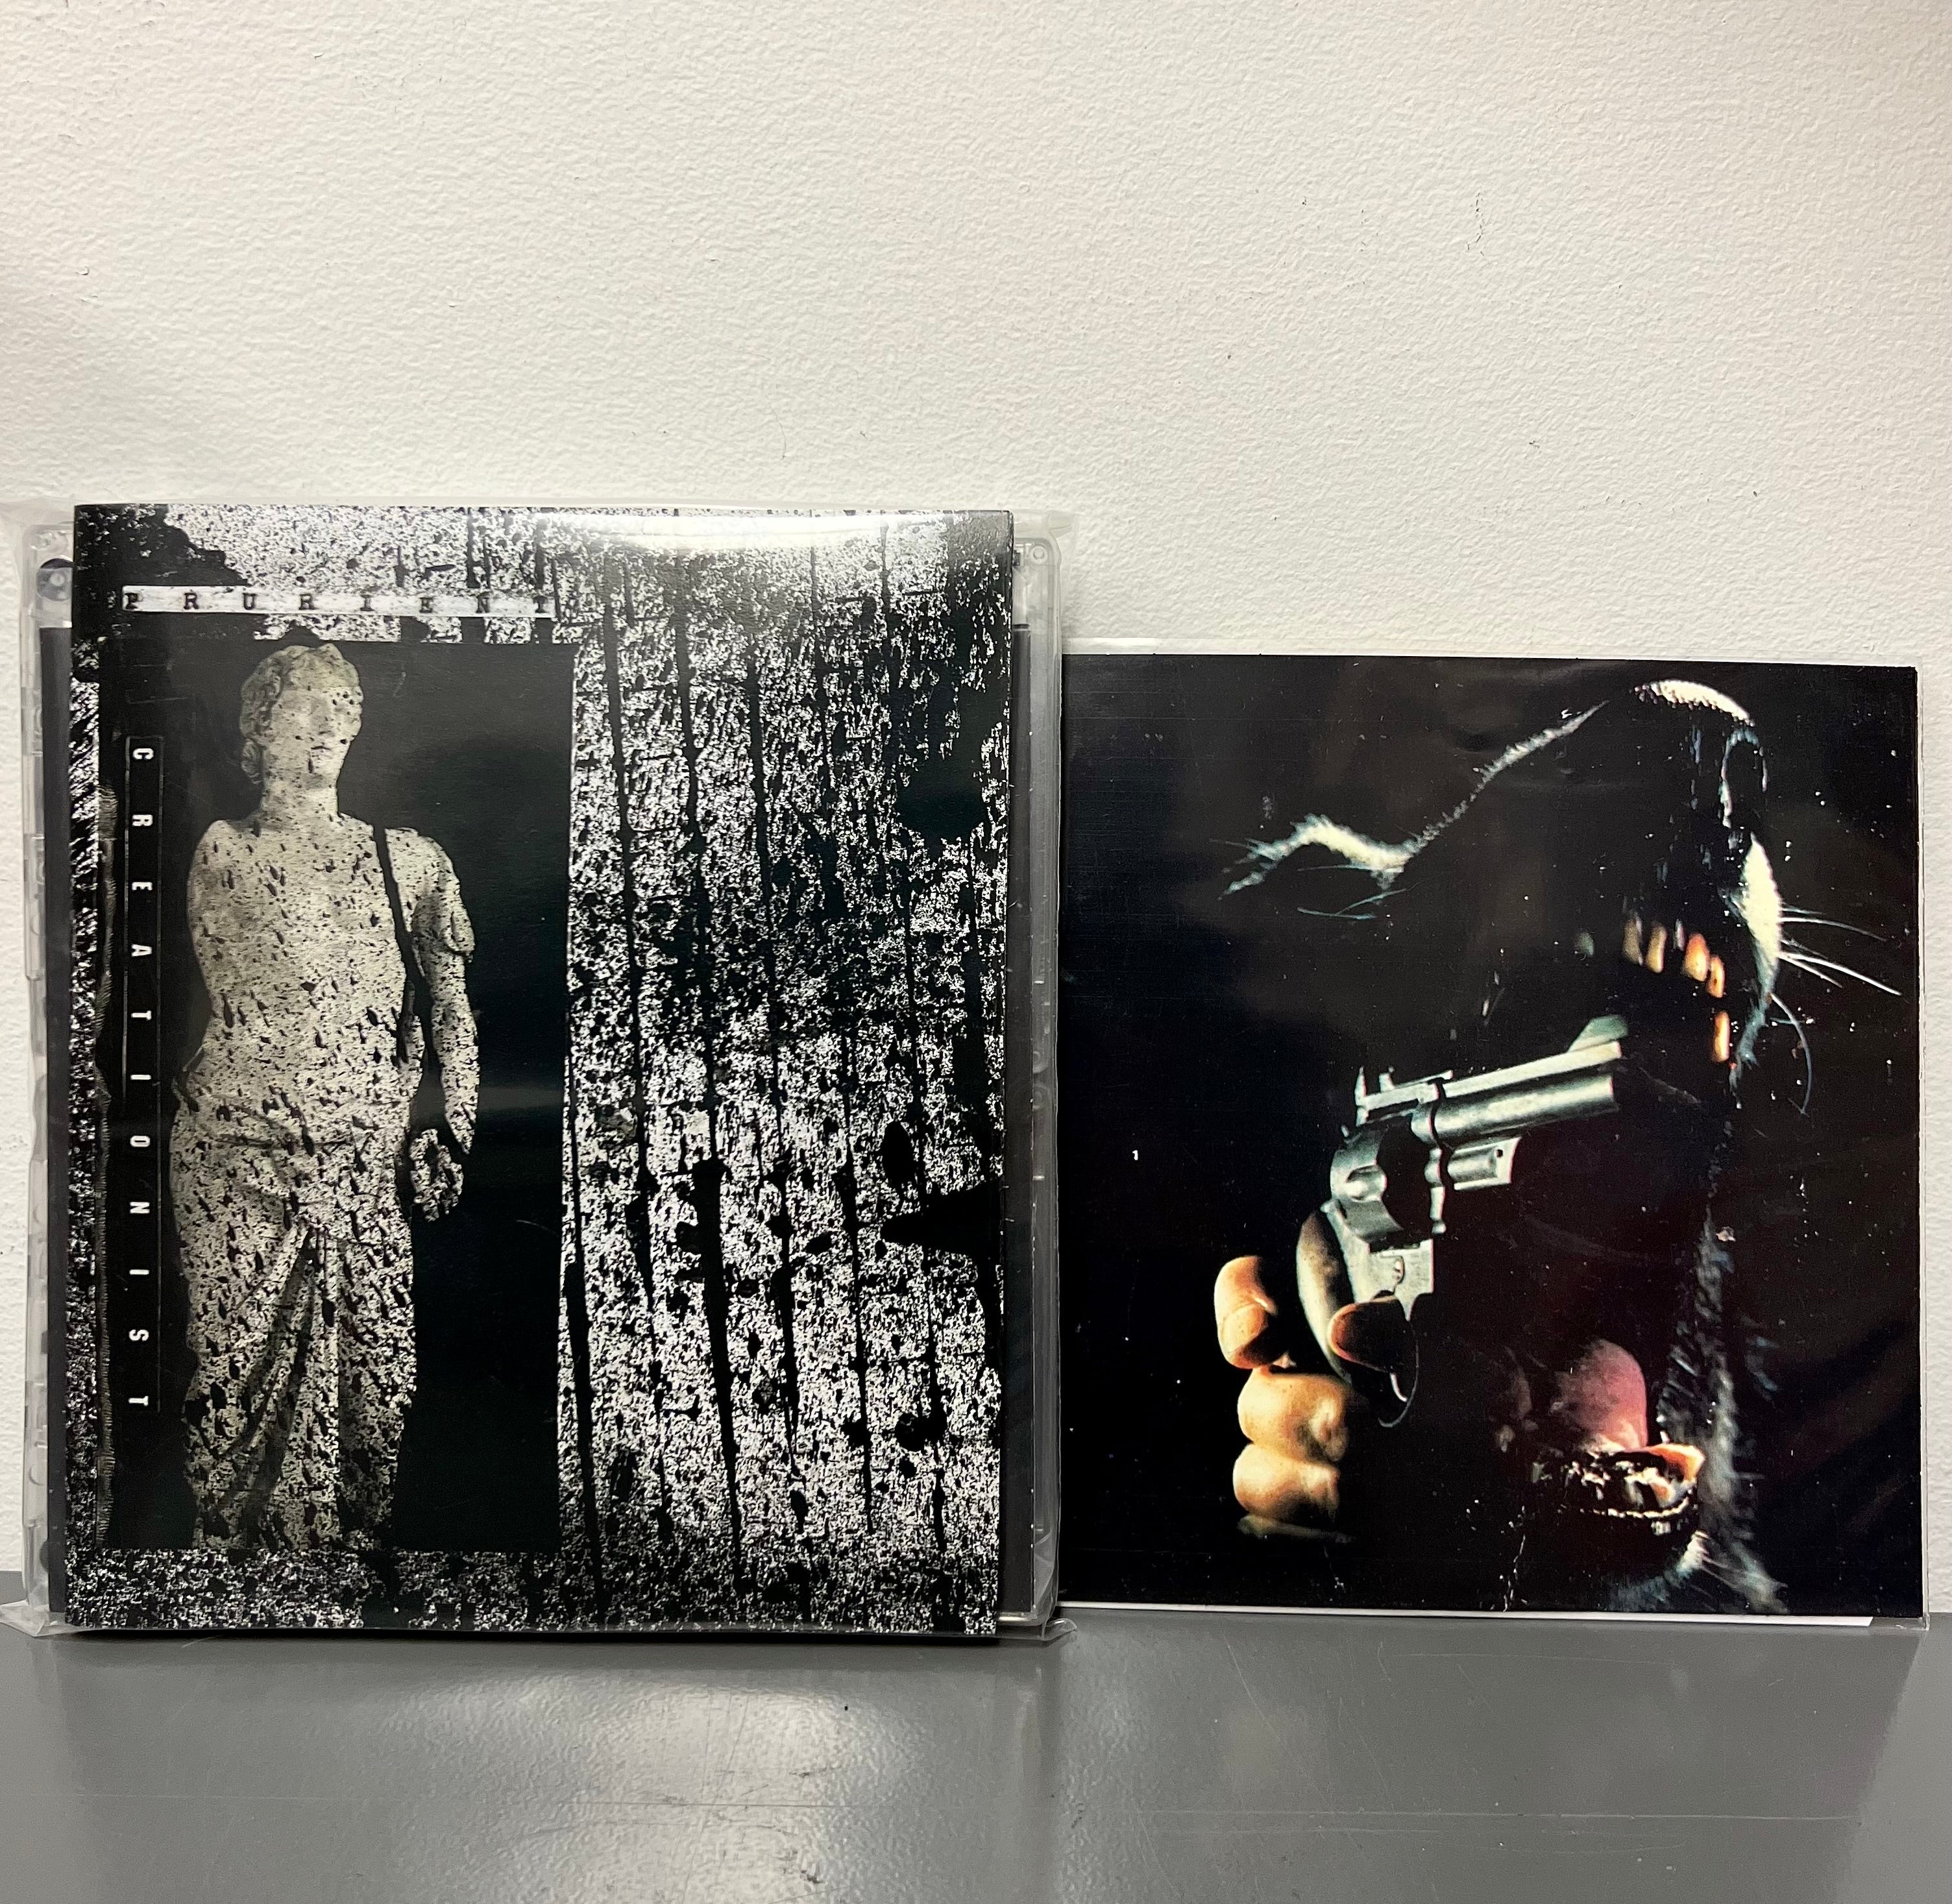 PRURIENT | CREATIONIST/SON OF SAM OF MICE AND MEN | 6XCS + 7” - ‘THE ULTIMATE EVIL” SPECIAL EDITION